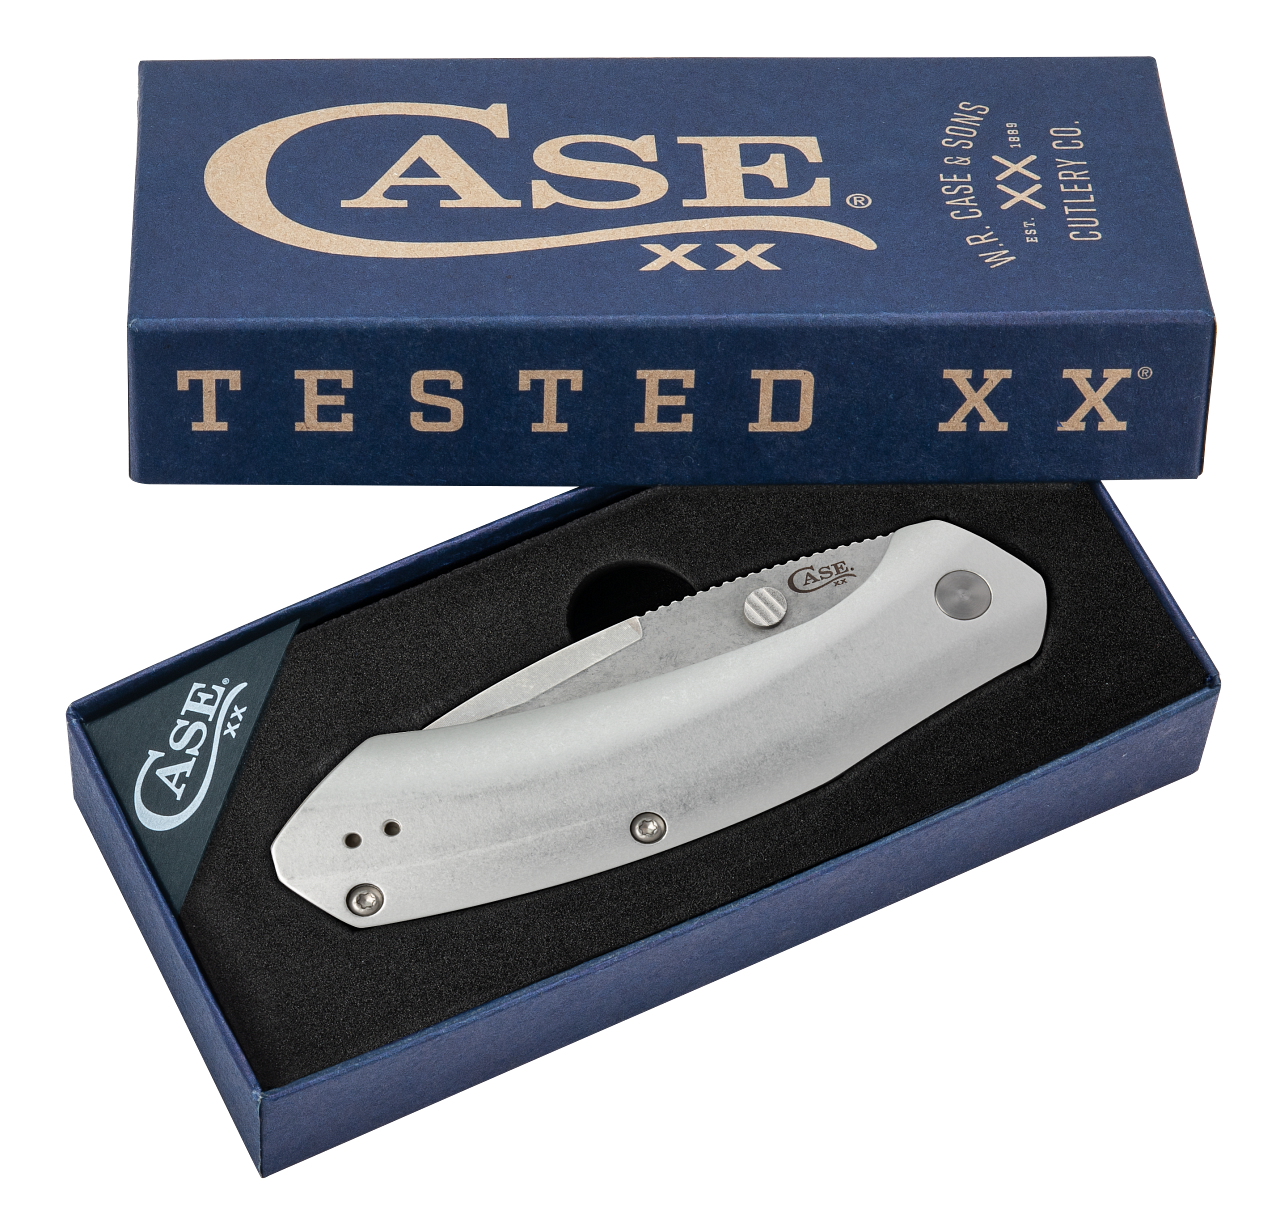 Case Westline O/A 36553 - 2.9" Stonewashed CPM-S35VN Modified Drop Point, Silver Anodized Aluminum Handle